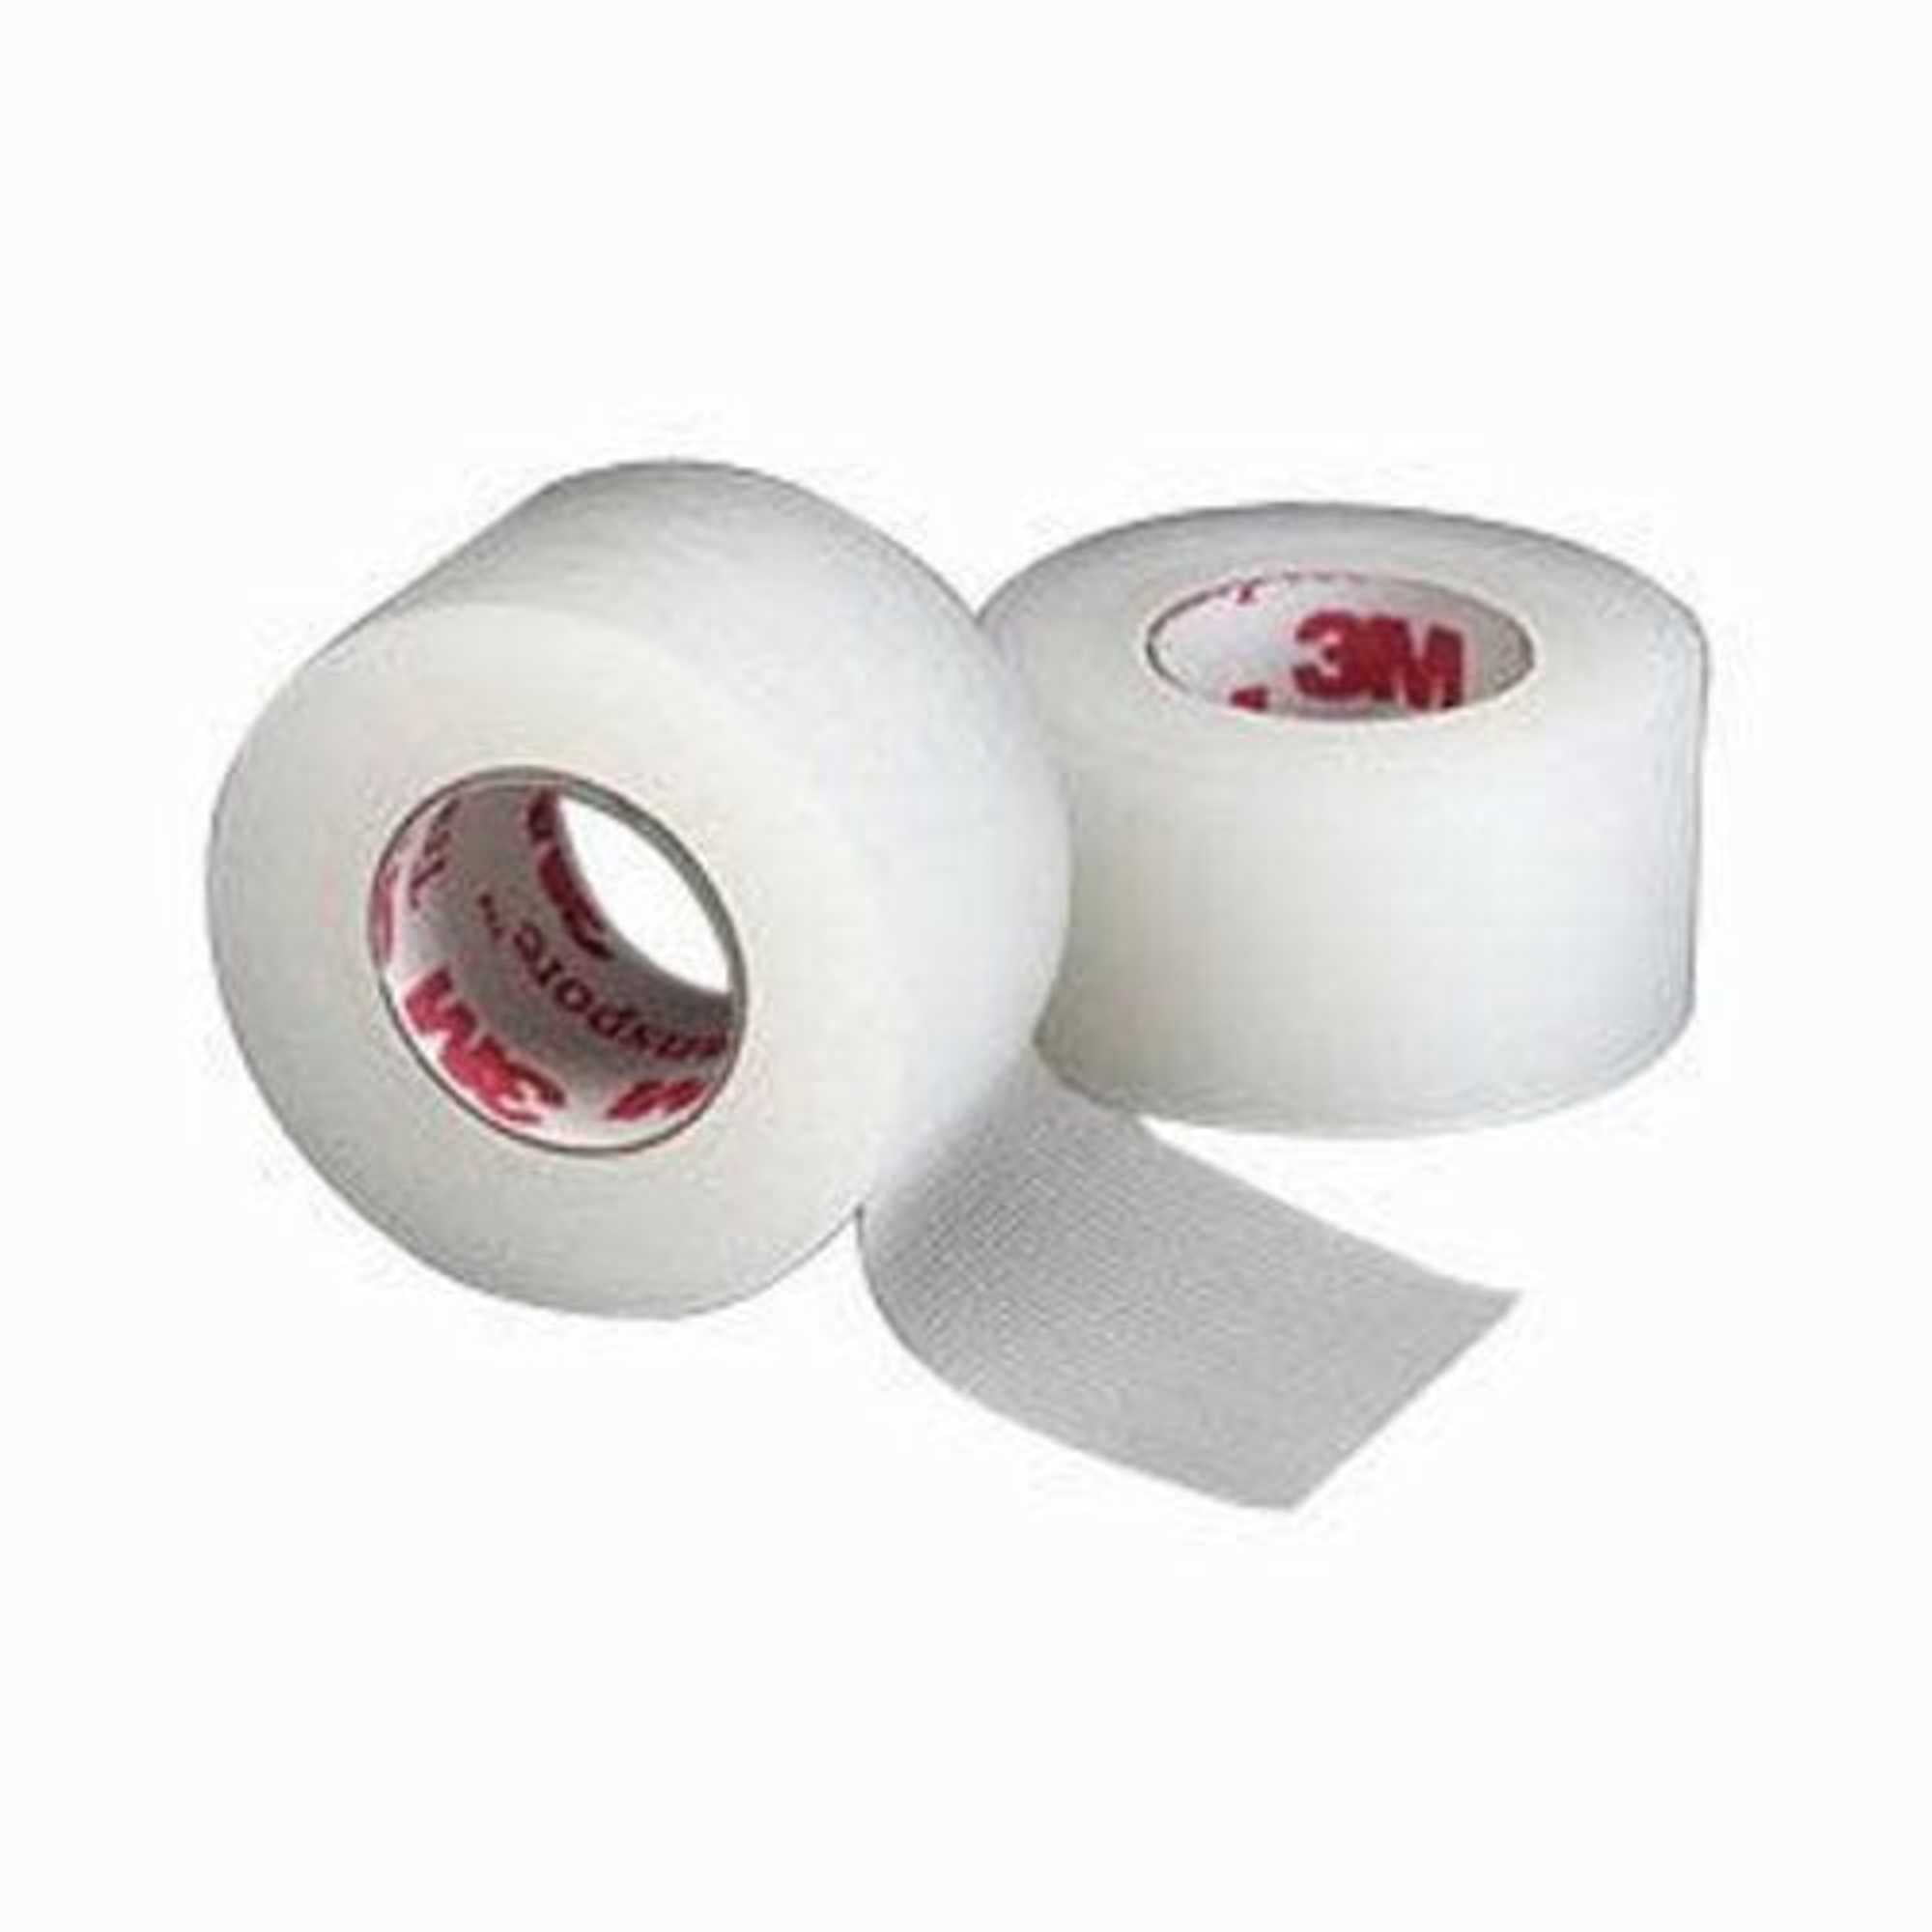 3M: Medical Tape Guide  Express Medical Supply